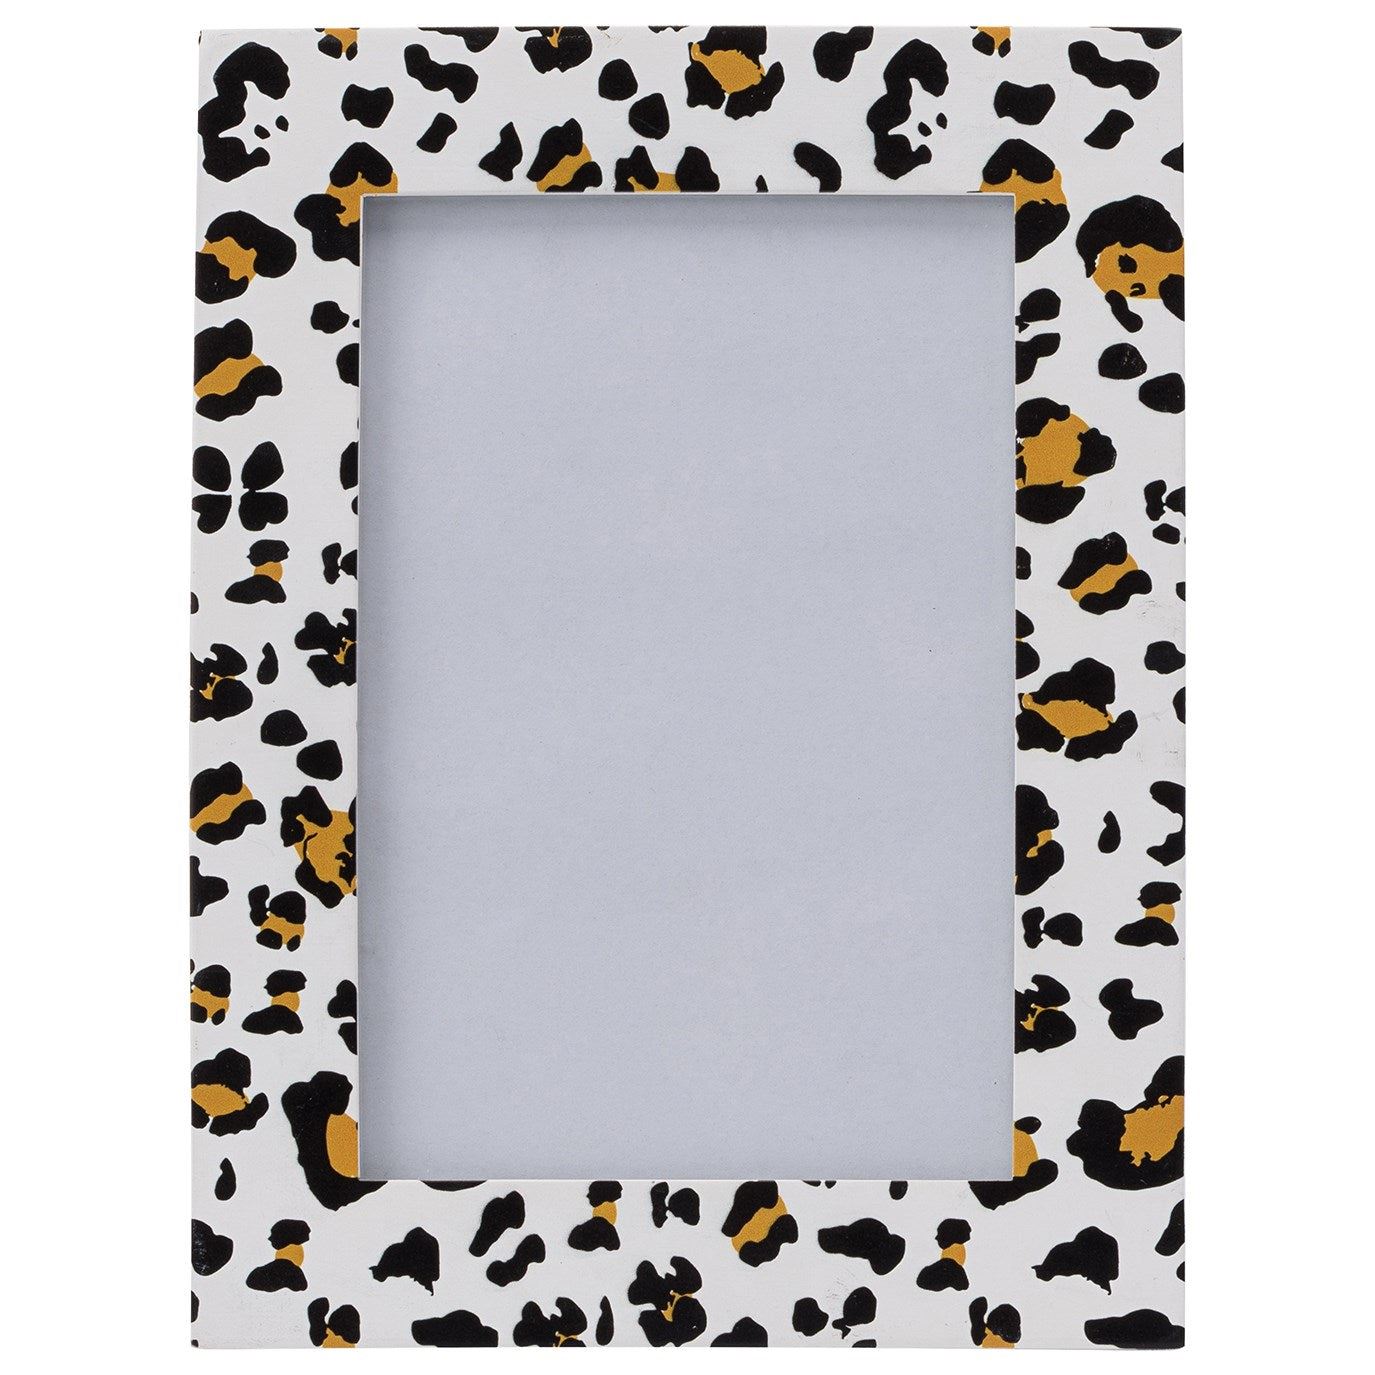 Looking Wild Leopard Frame 4 x 6 inches